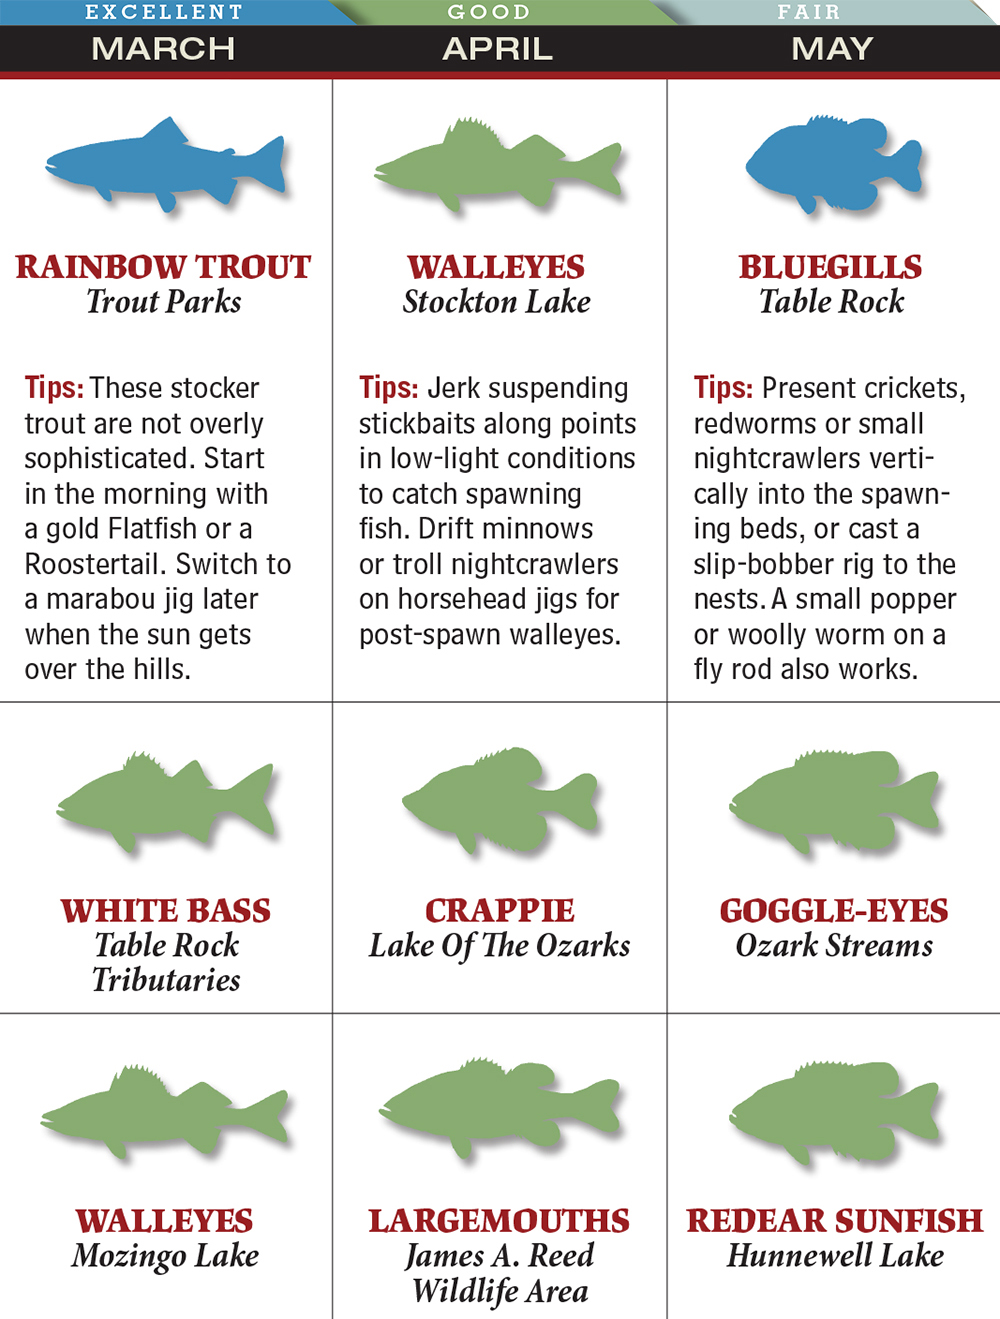 Your Best Spring Fishing in Missouri